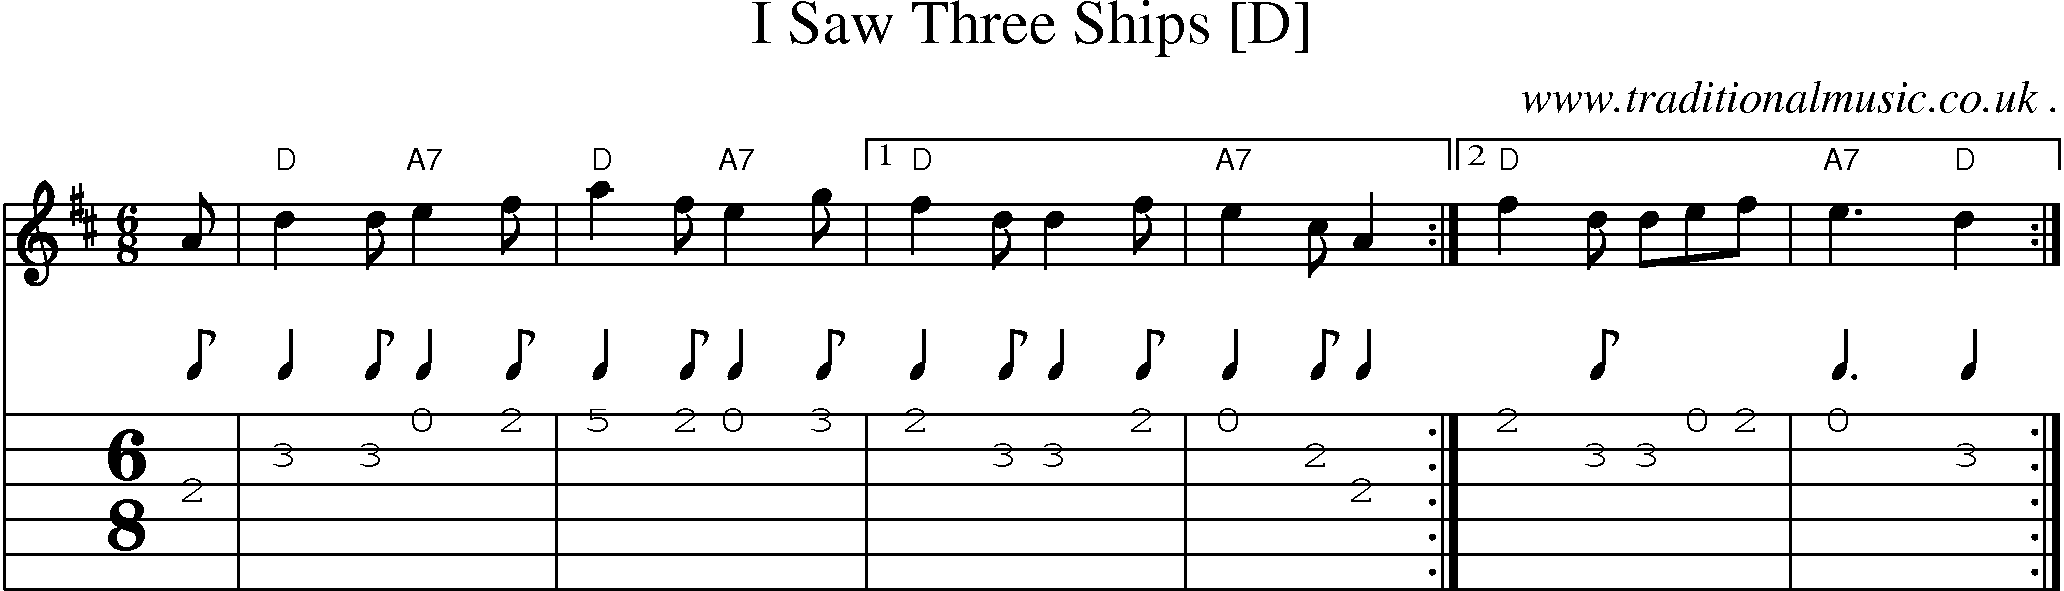 Sheet-music  score, Chords and Guitar Tabs for I Saw Three Ships [d]